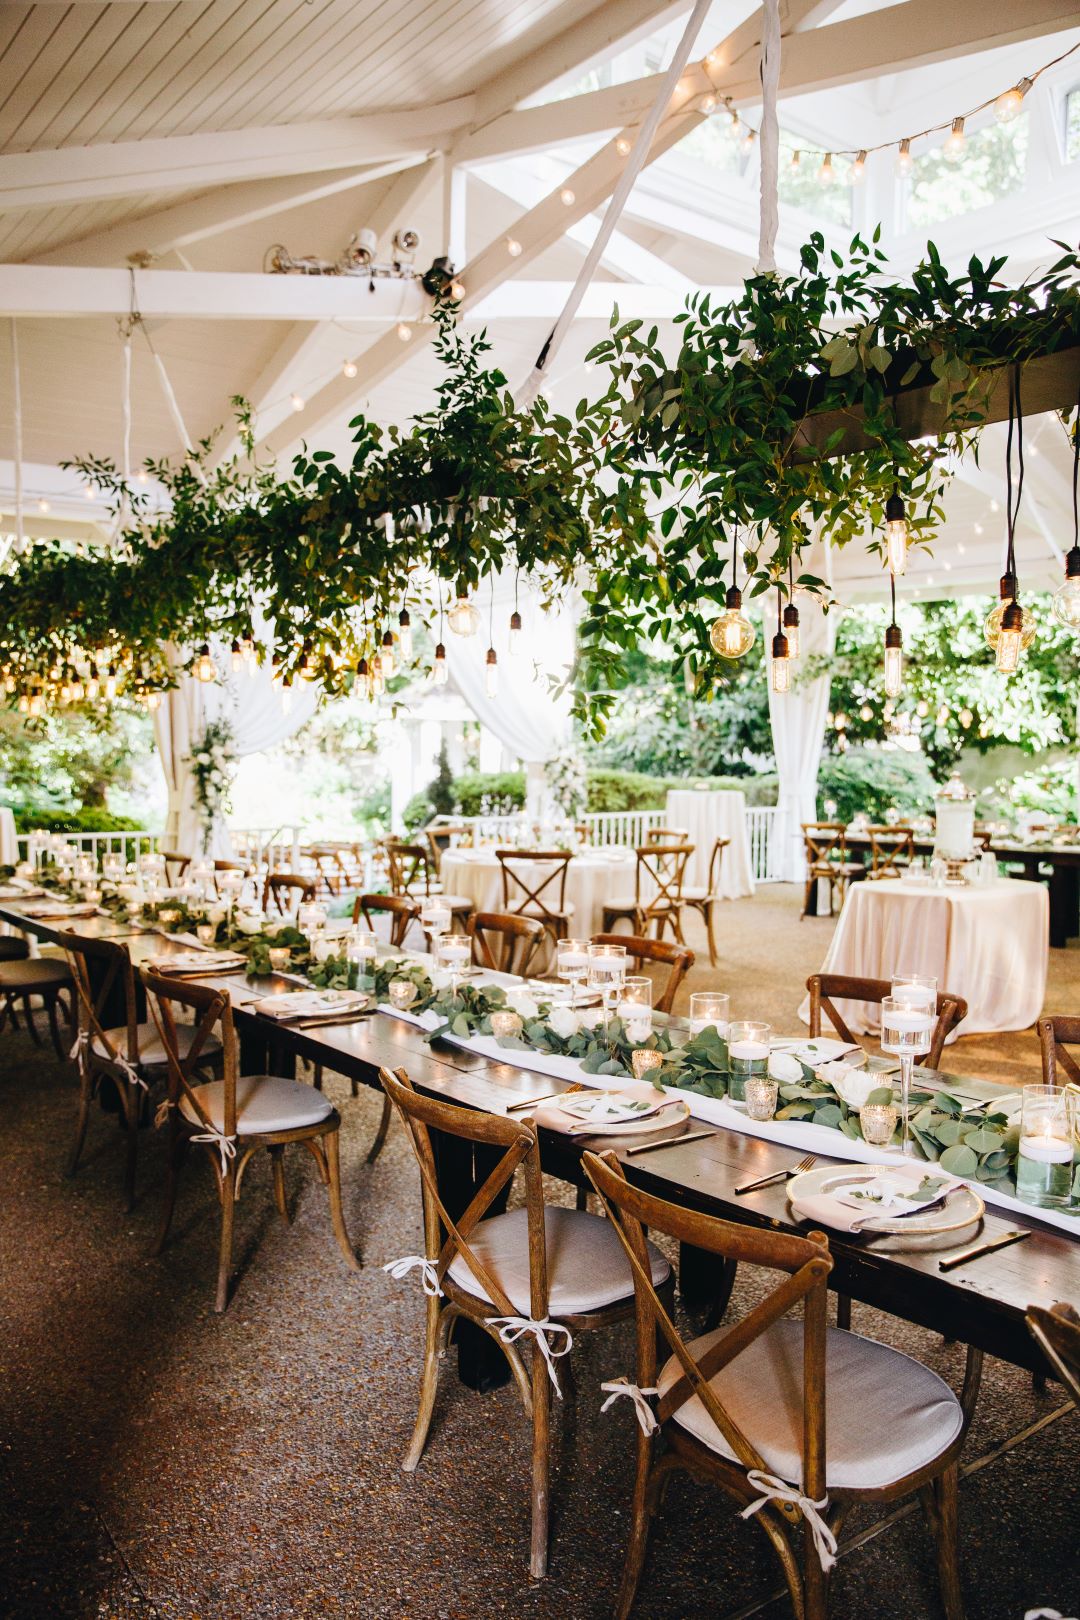 Long farmhouse table with greenery chandelier at earthy summer garden wedding in September, neutrals & greenery